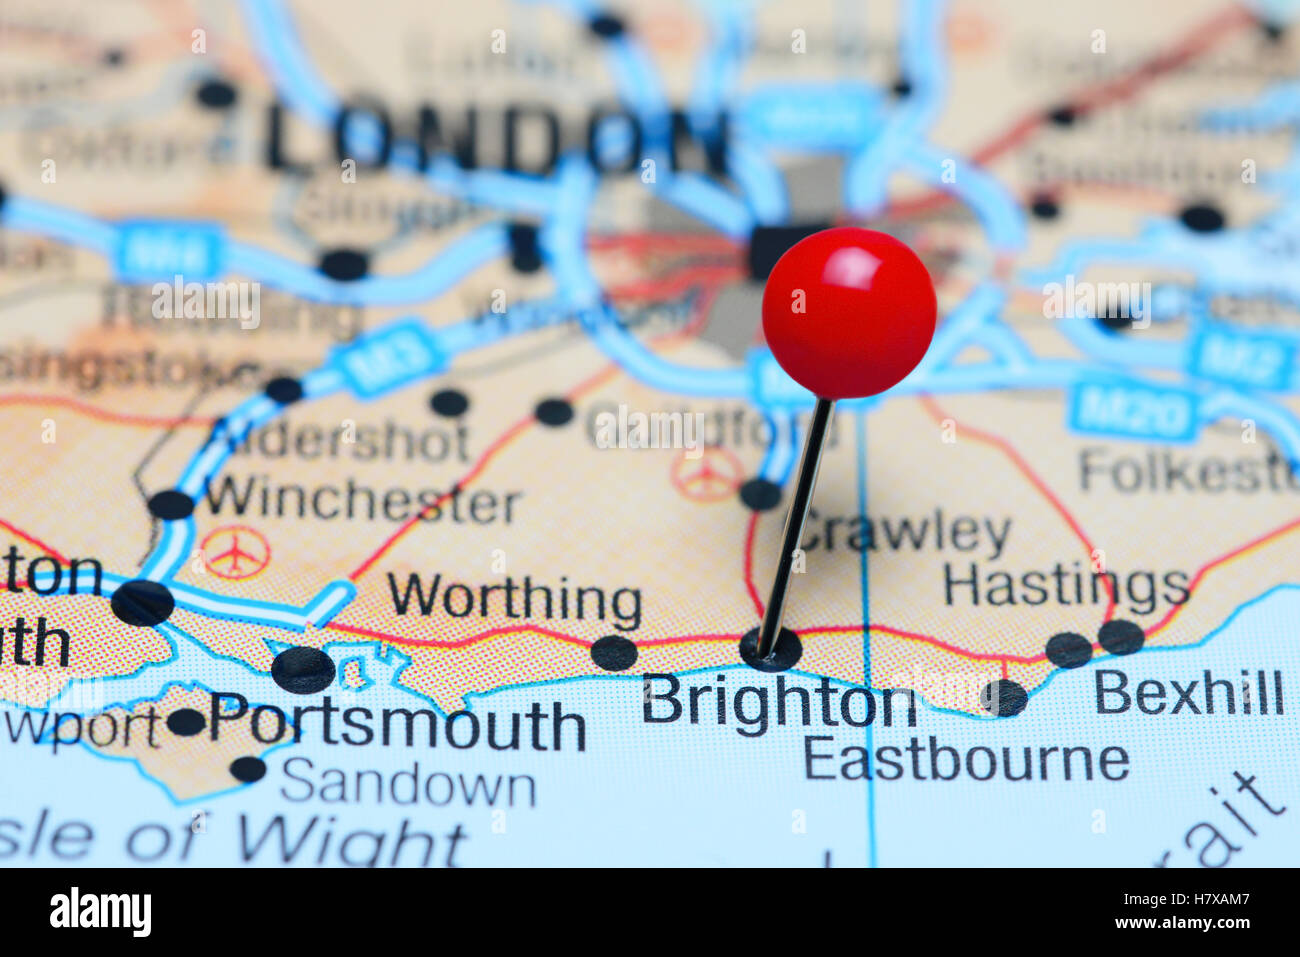 Brighton pinned on a map of England with a red pin